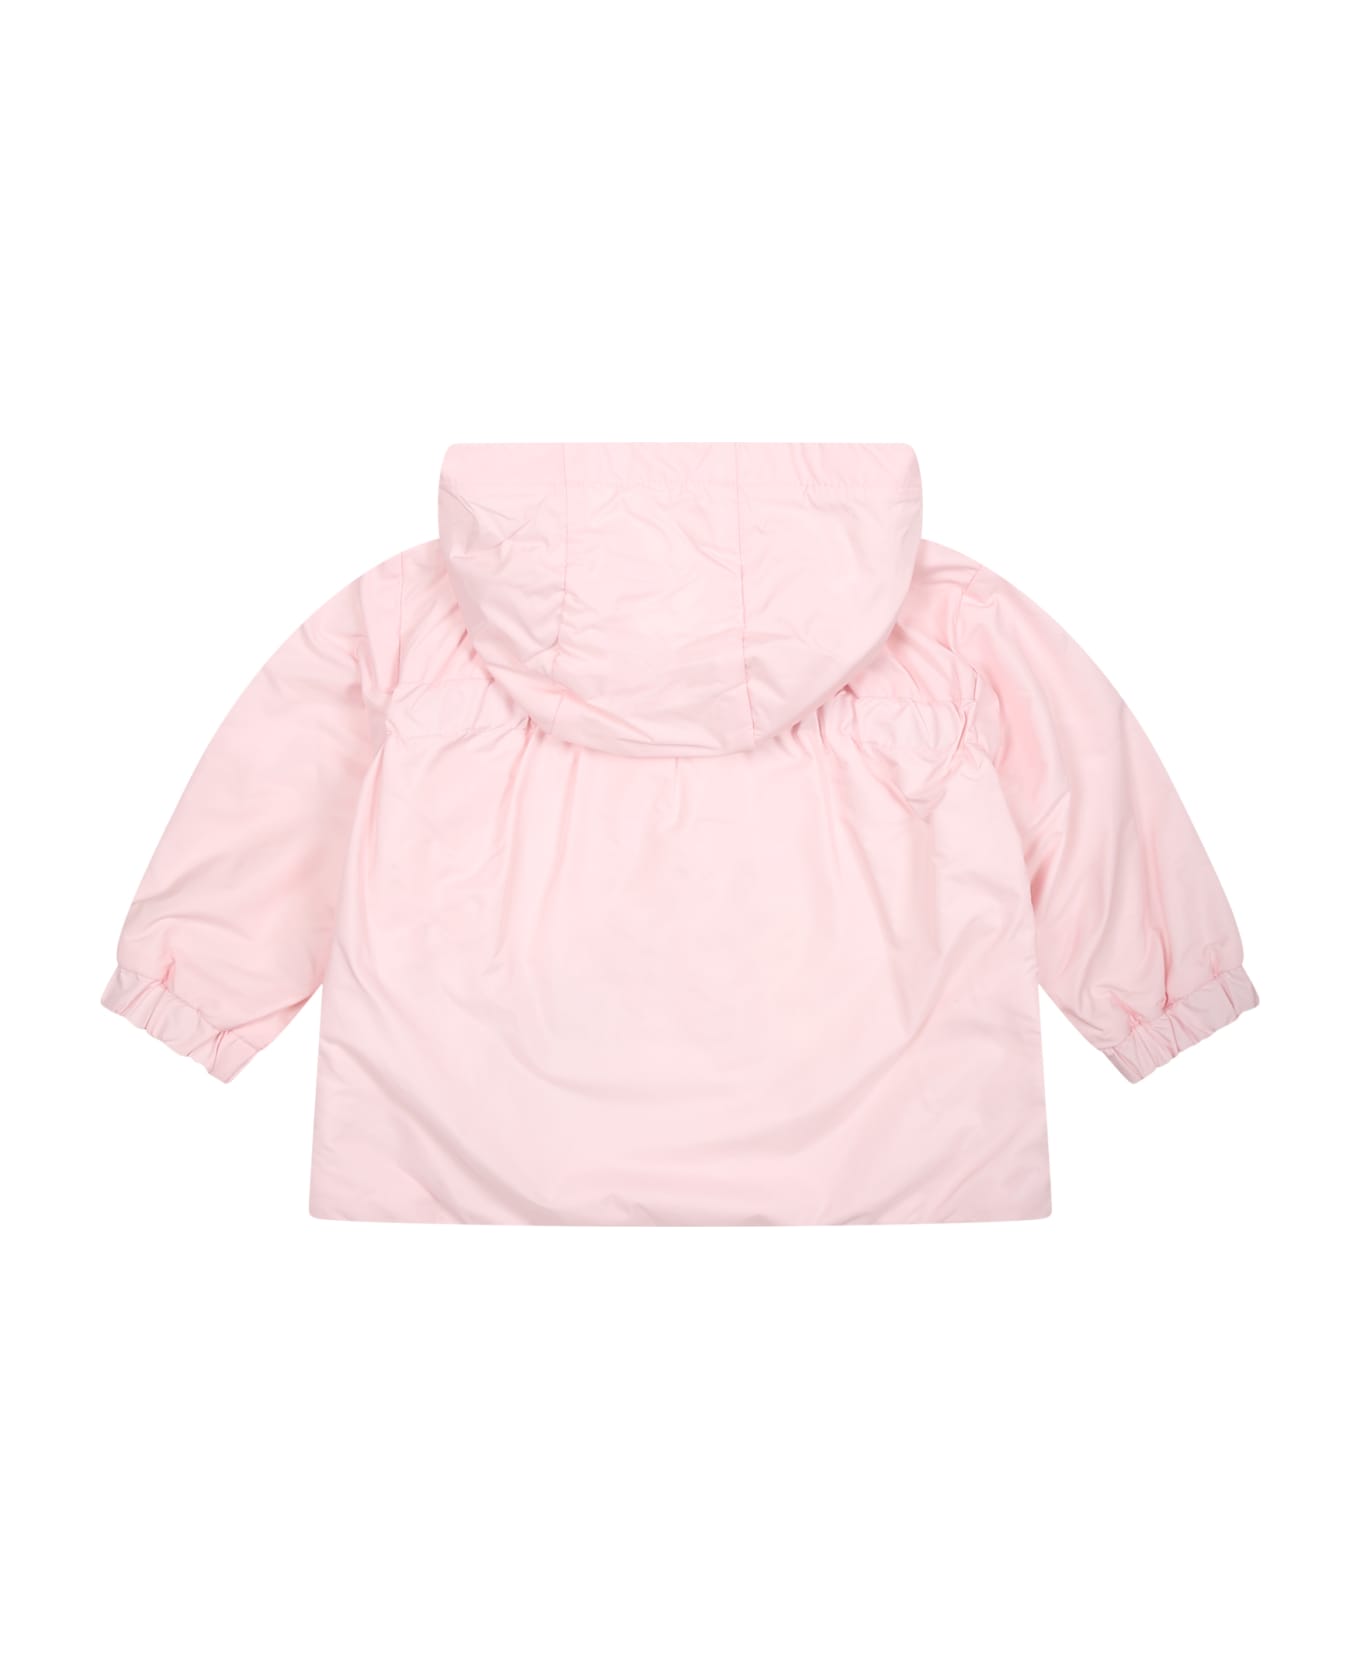 Moncler Windbreaker For Baby Girl With Logo